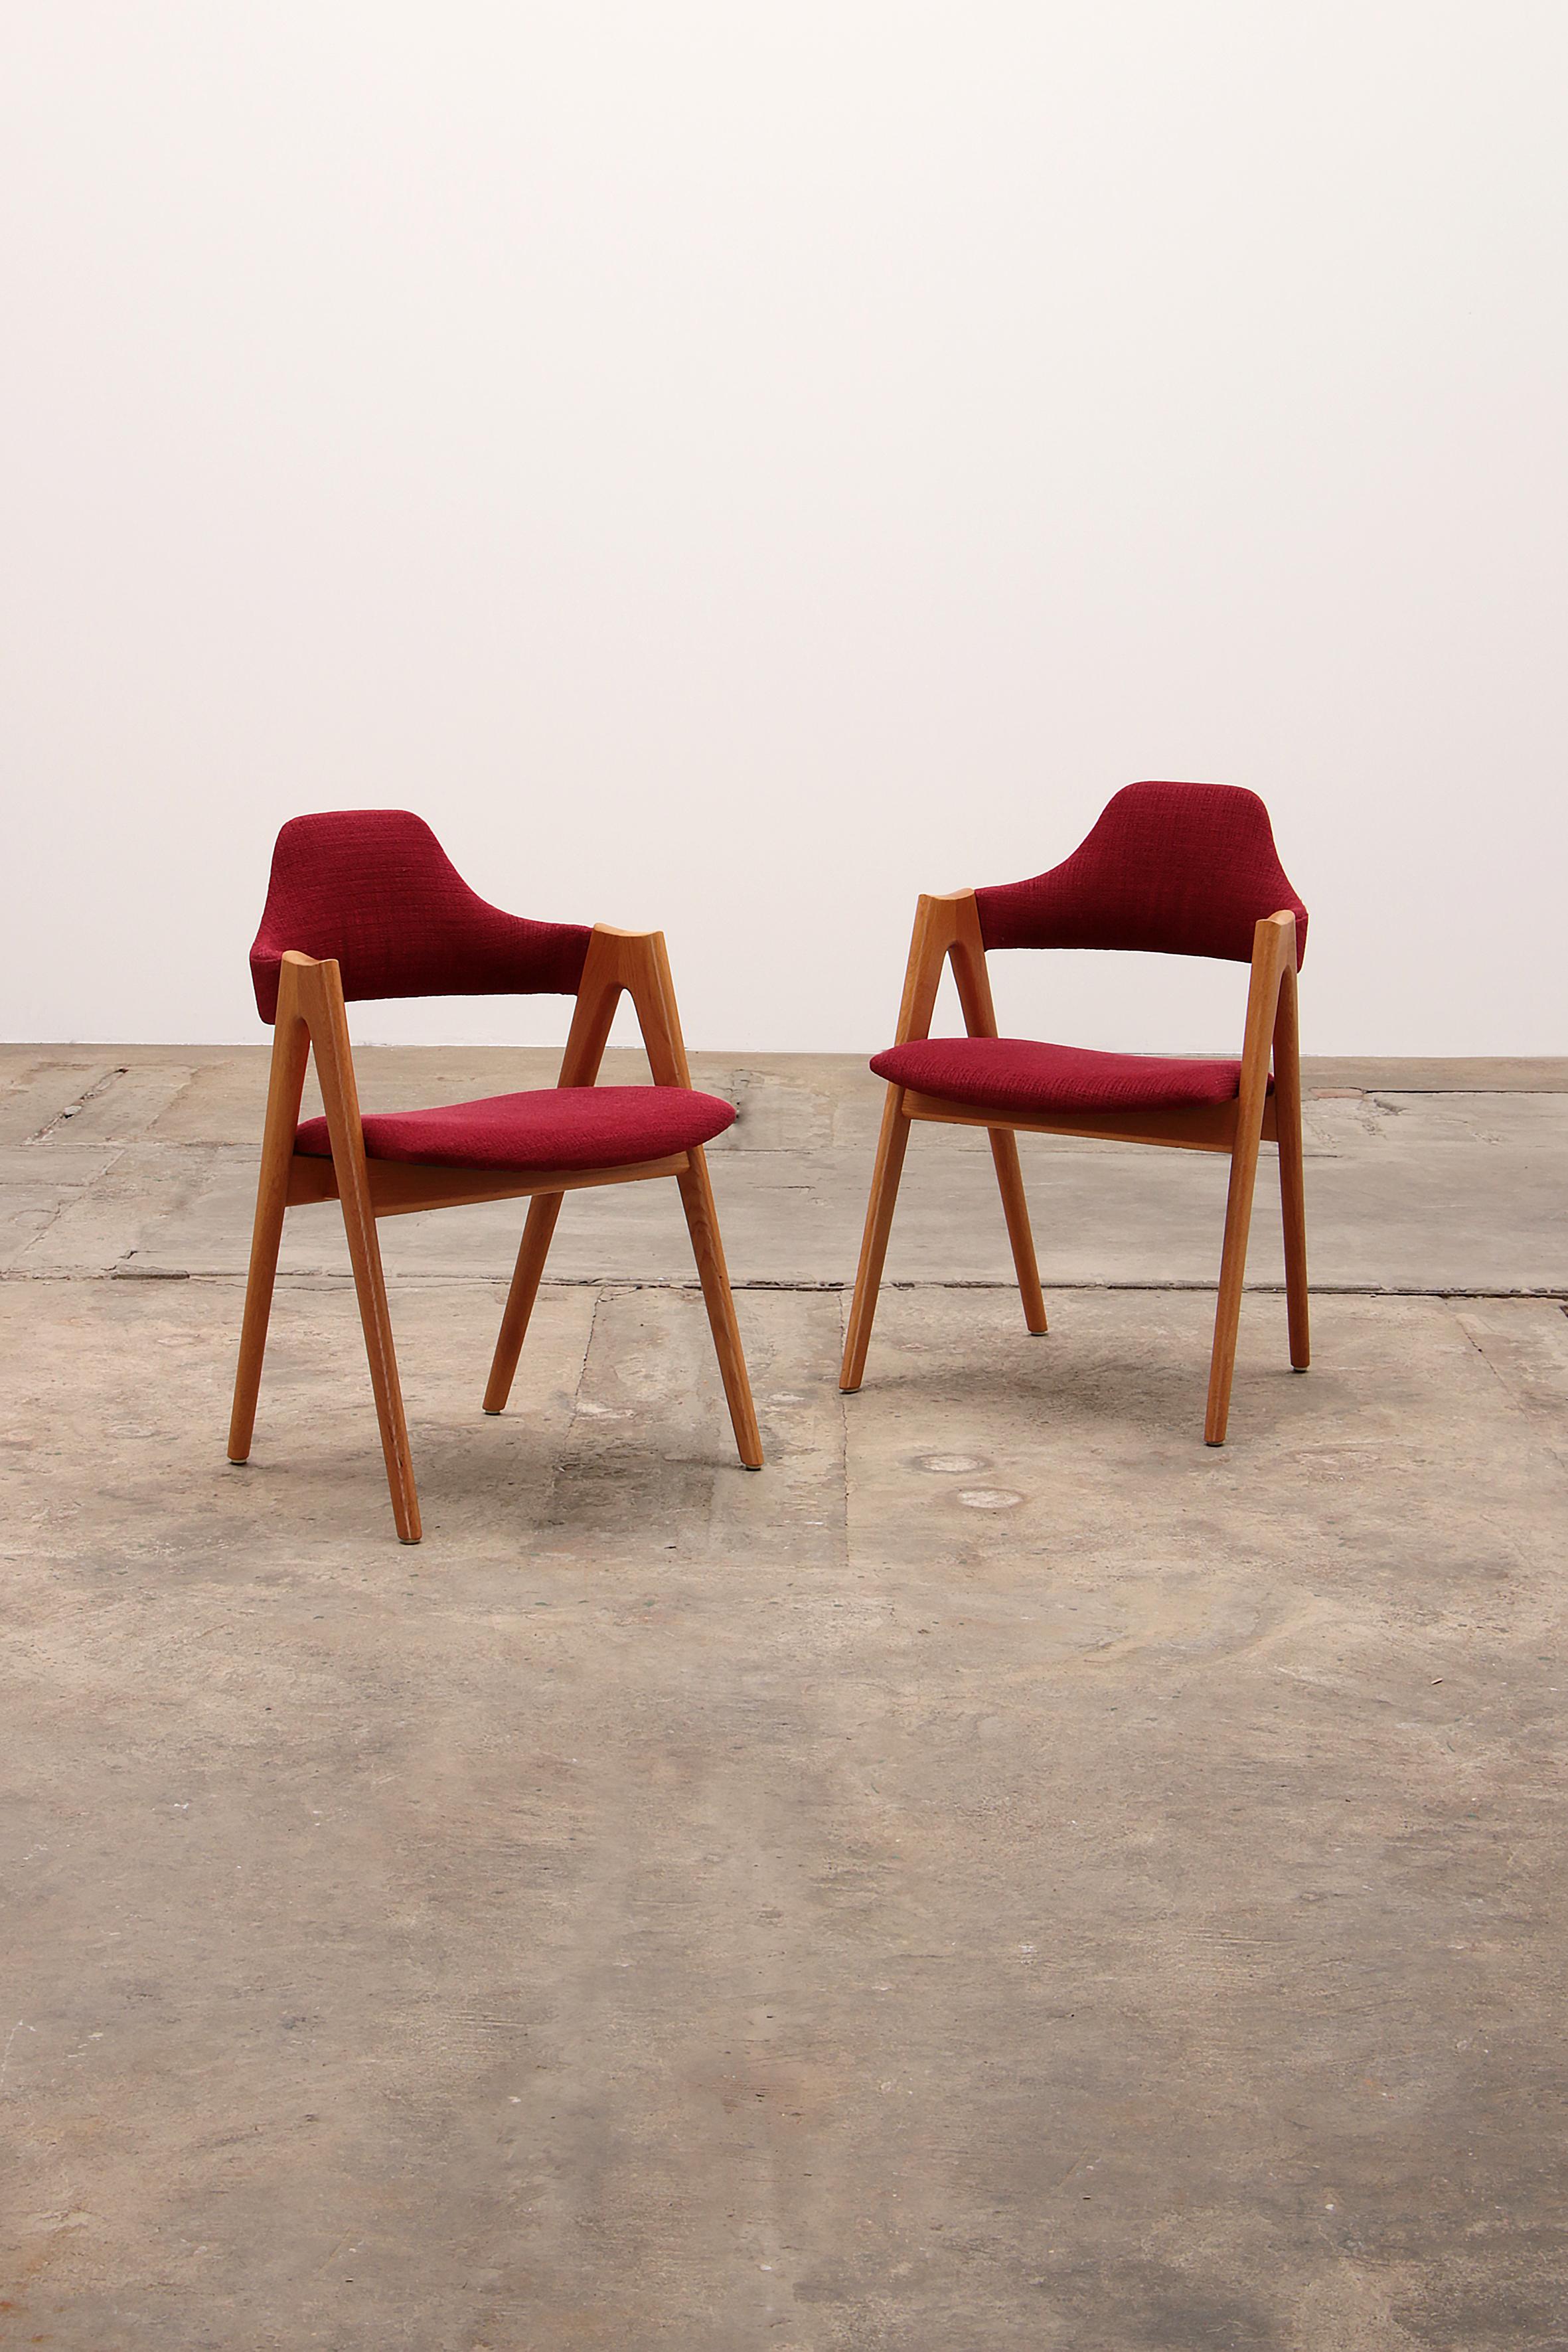 Set of 2 dining chairs designed by Kai Kristiansen for SVA Møbler, Denmark 1960.

The chairs have an oak frame and are upholstered in a red fabric.

are in very good vintage condition.

About the creator

Danish designer Kai Kristiansen was